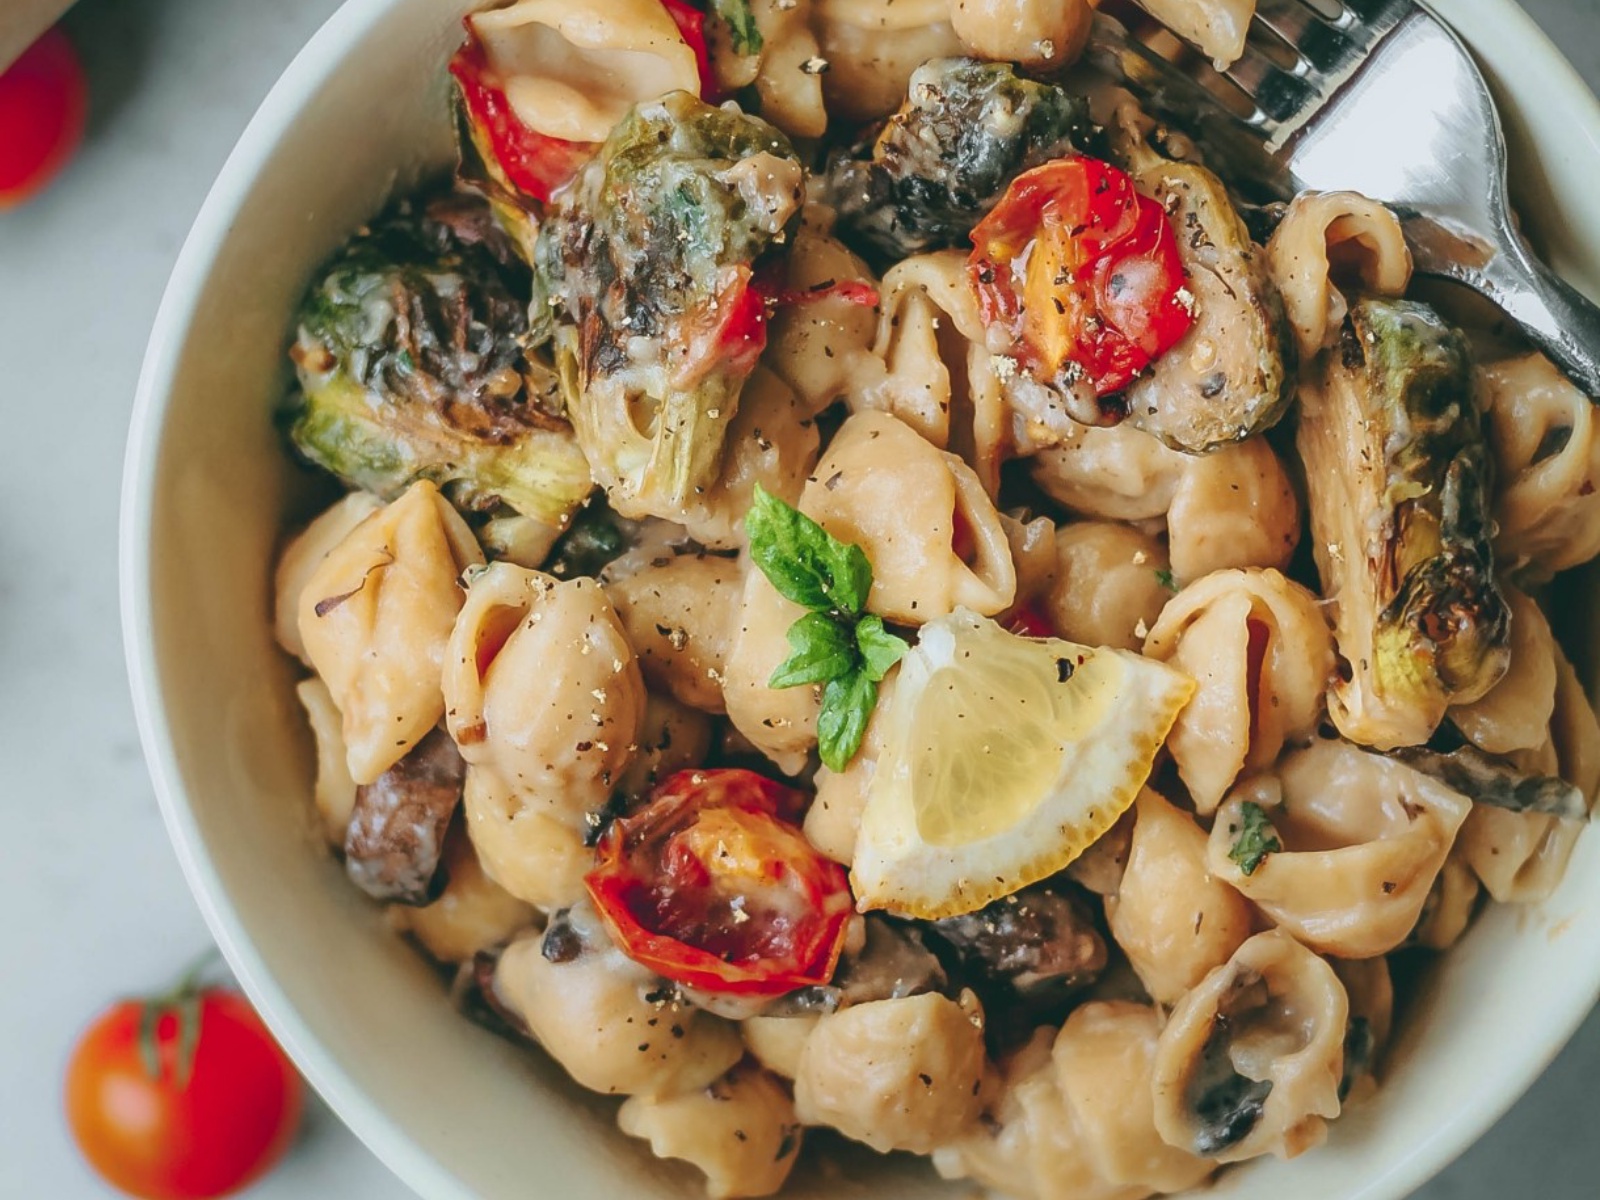 Creamy Garlic Pasta With Roasted Brussels Sprouts and Tomatoes